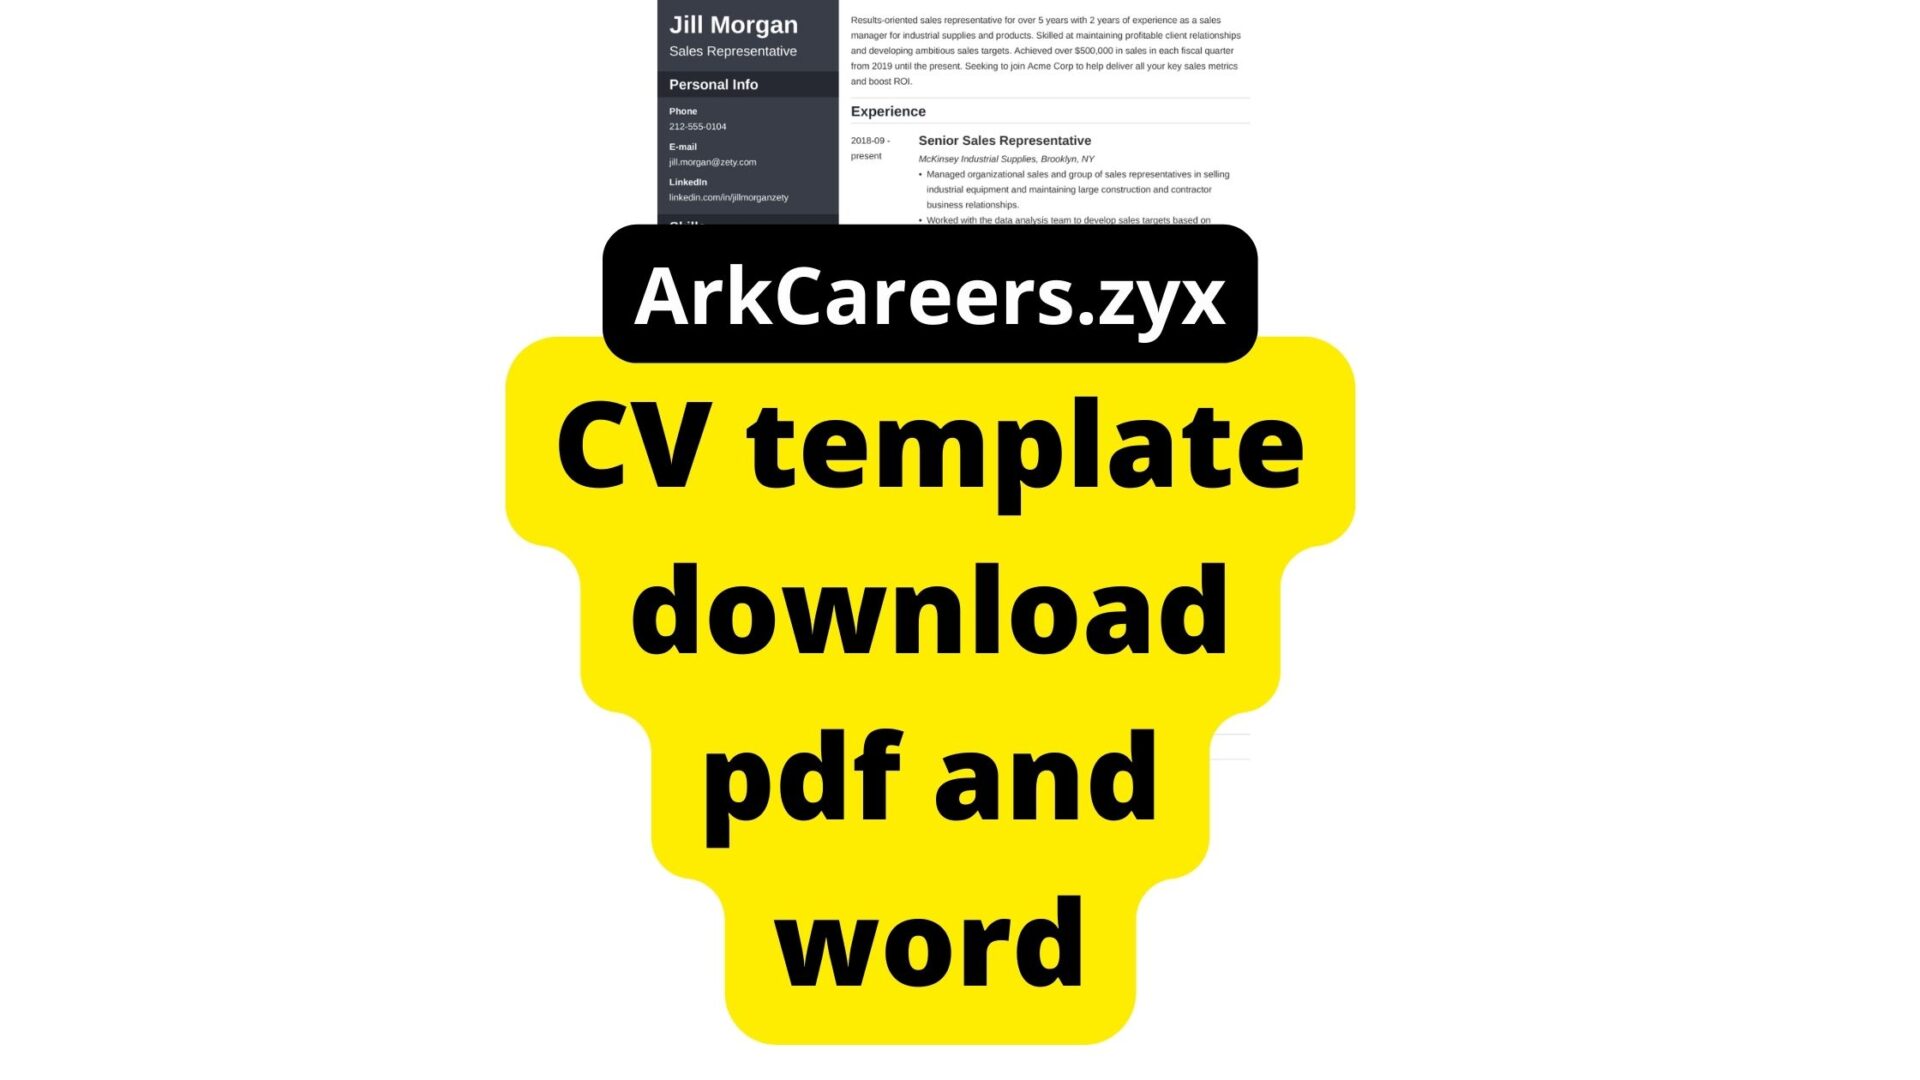 cv-template-download-pdf-and-word-arkcareers-xyz